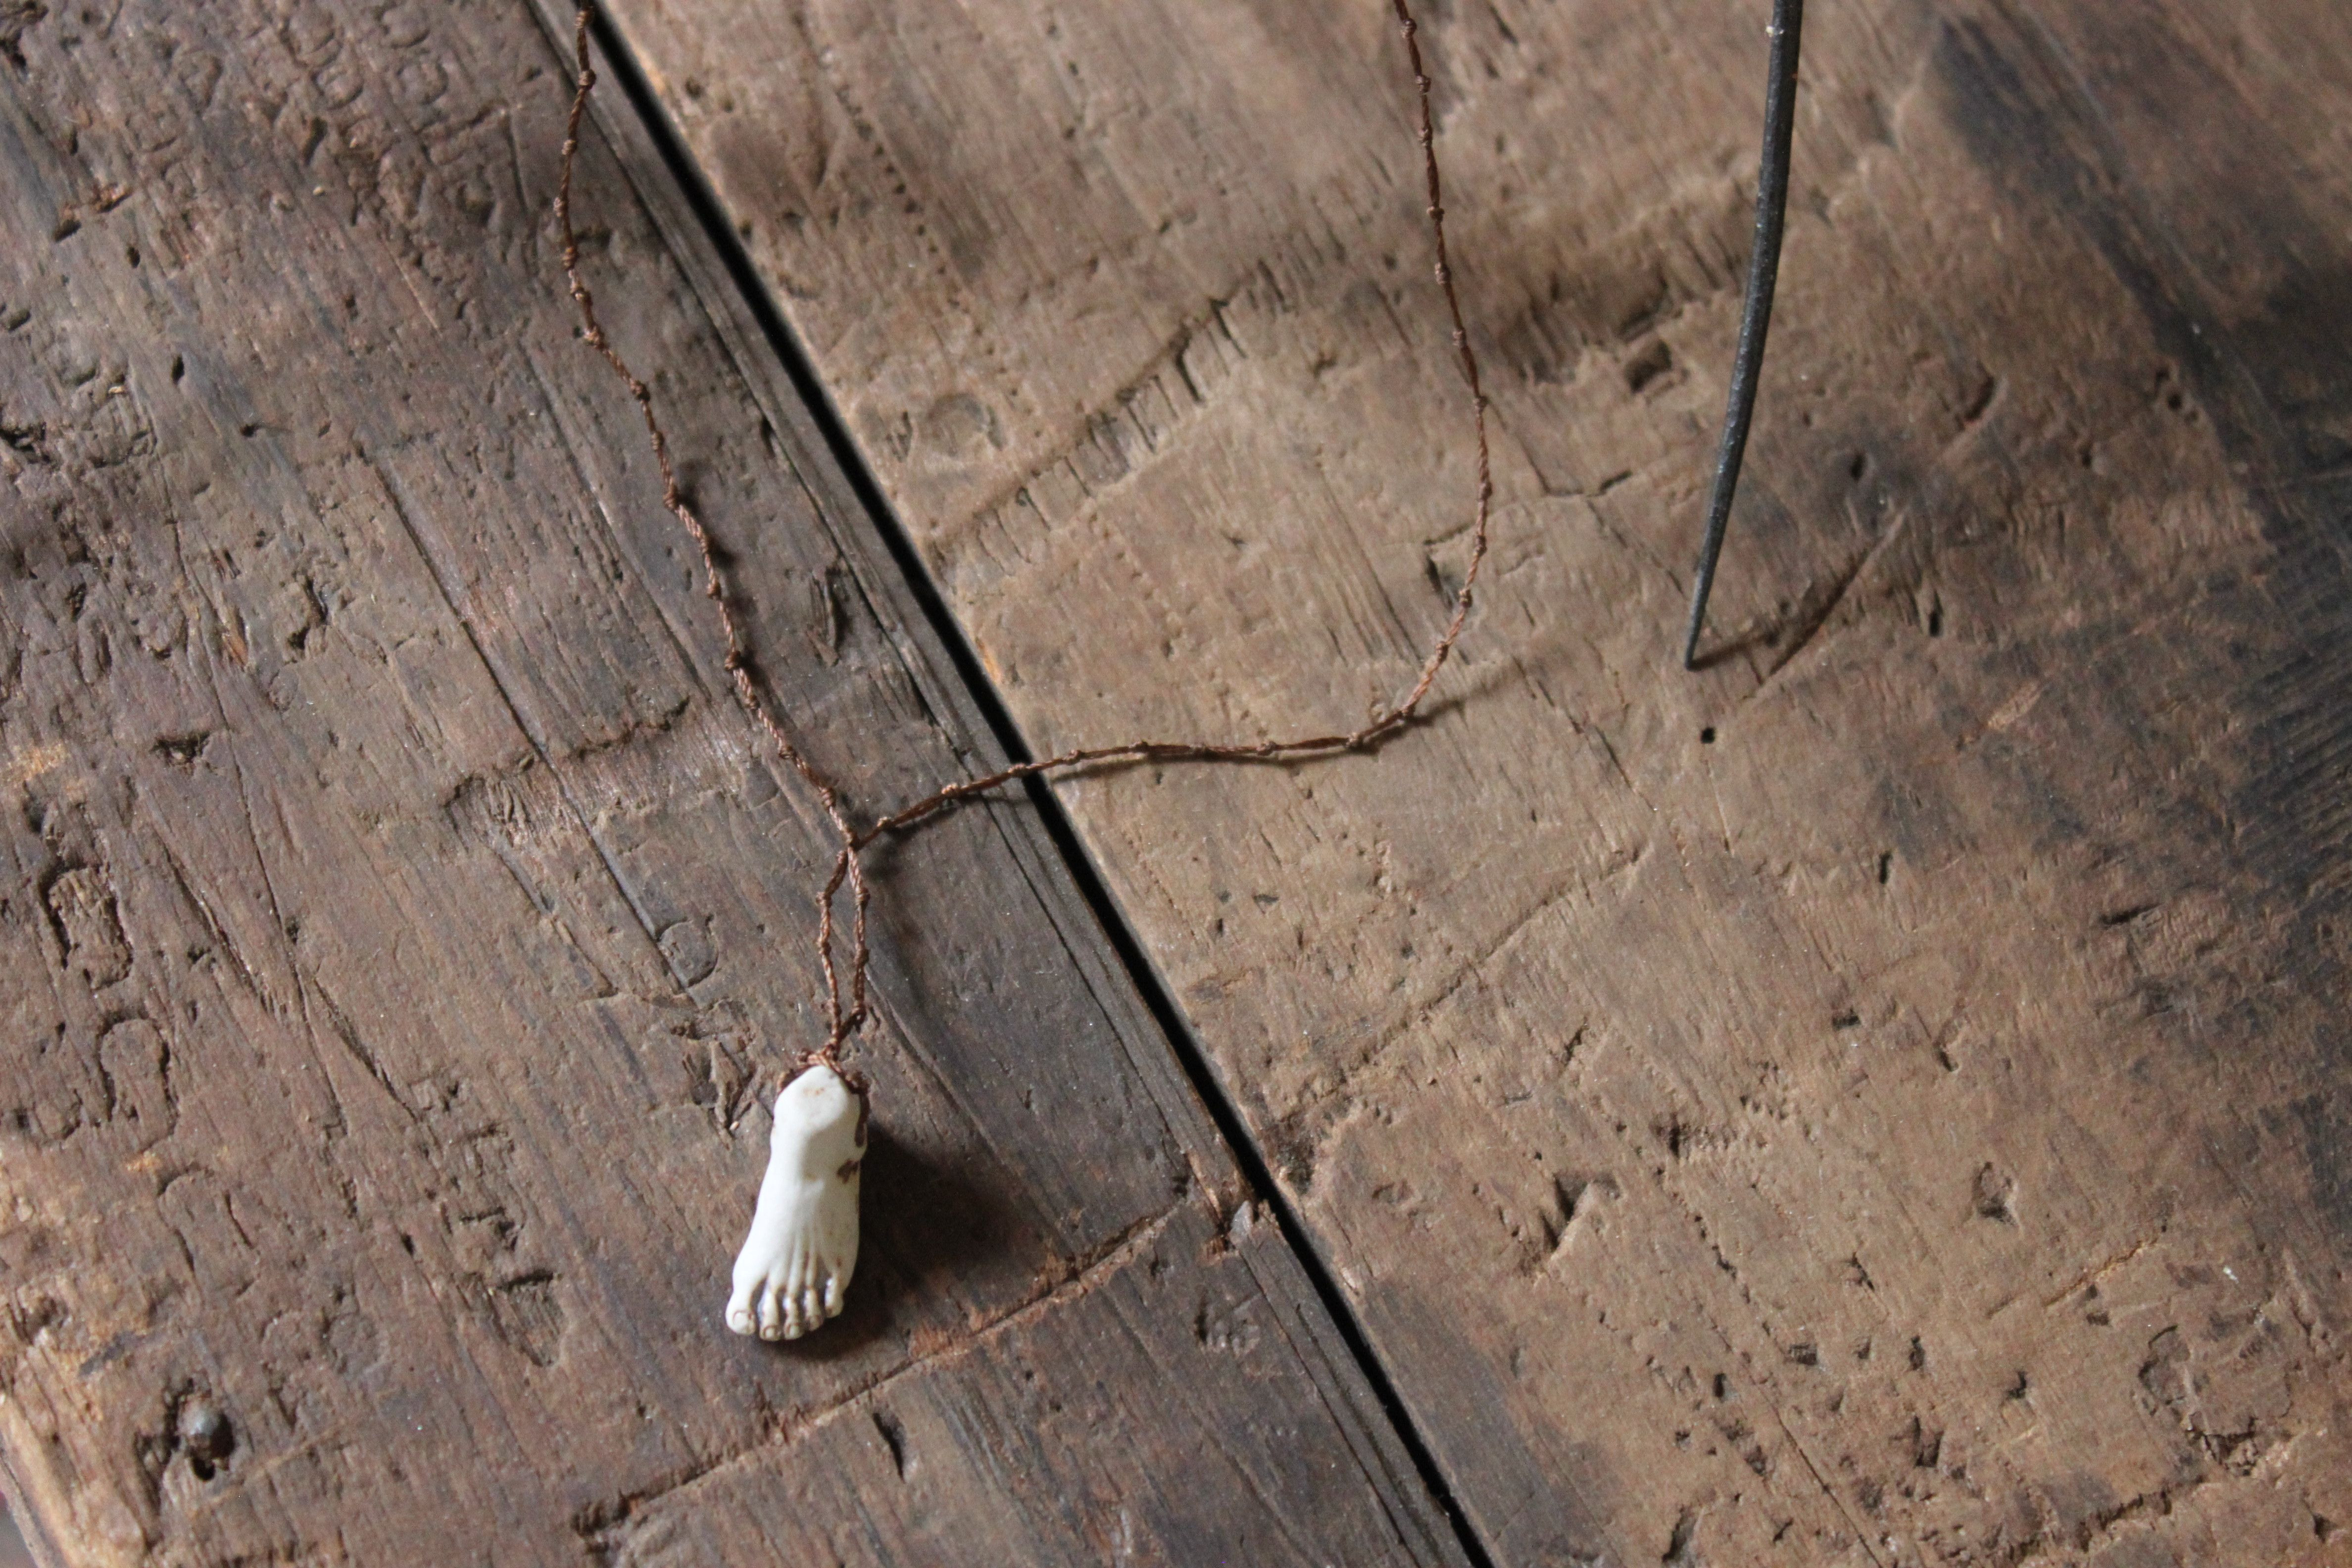 21 Fashionable Hardwood Flooring asheville Nc 2024 free download hardwood flooring asheville nc of porcelain foot on a brown knotted silk cord in the gallery today throughout porcelain foot on a brown knotted silk cord in the gallery today